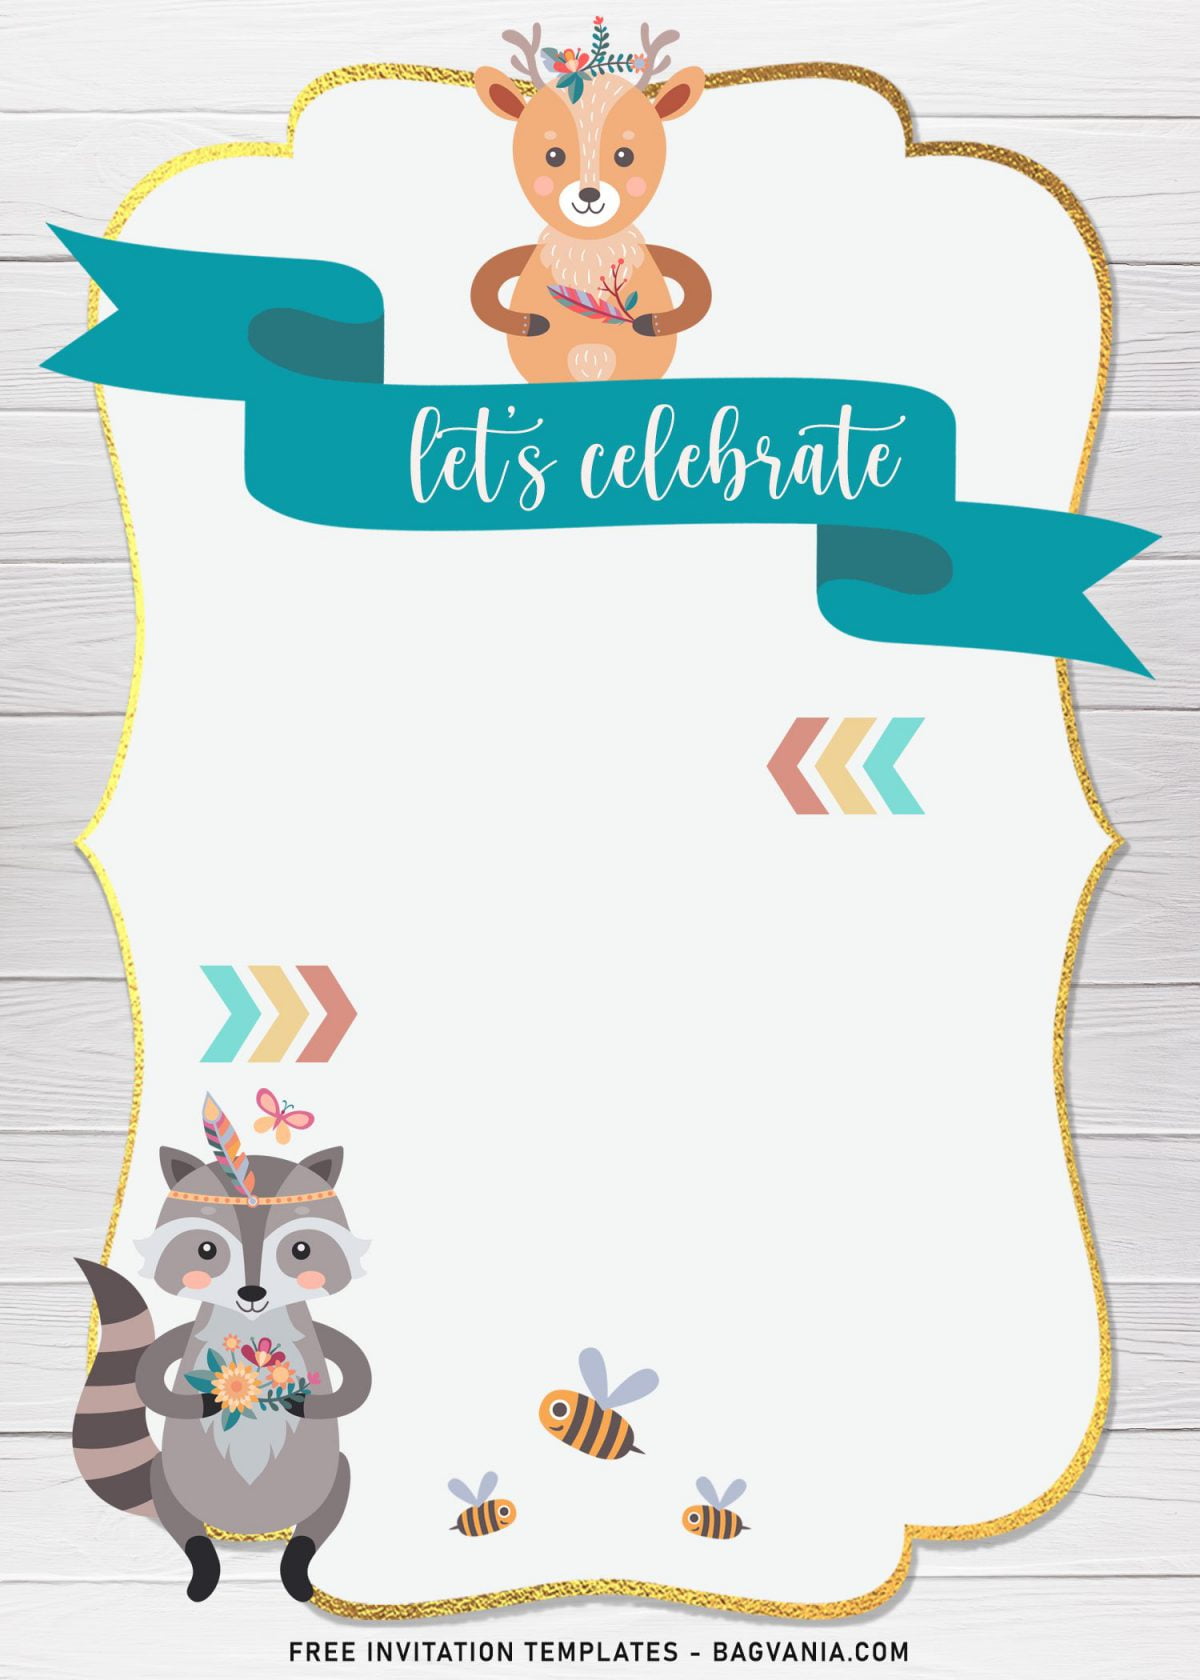 7+ Cute Boho Wild Ones Birthday Invitation Templates and has colorful arrows